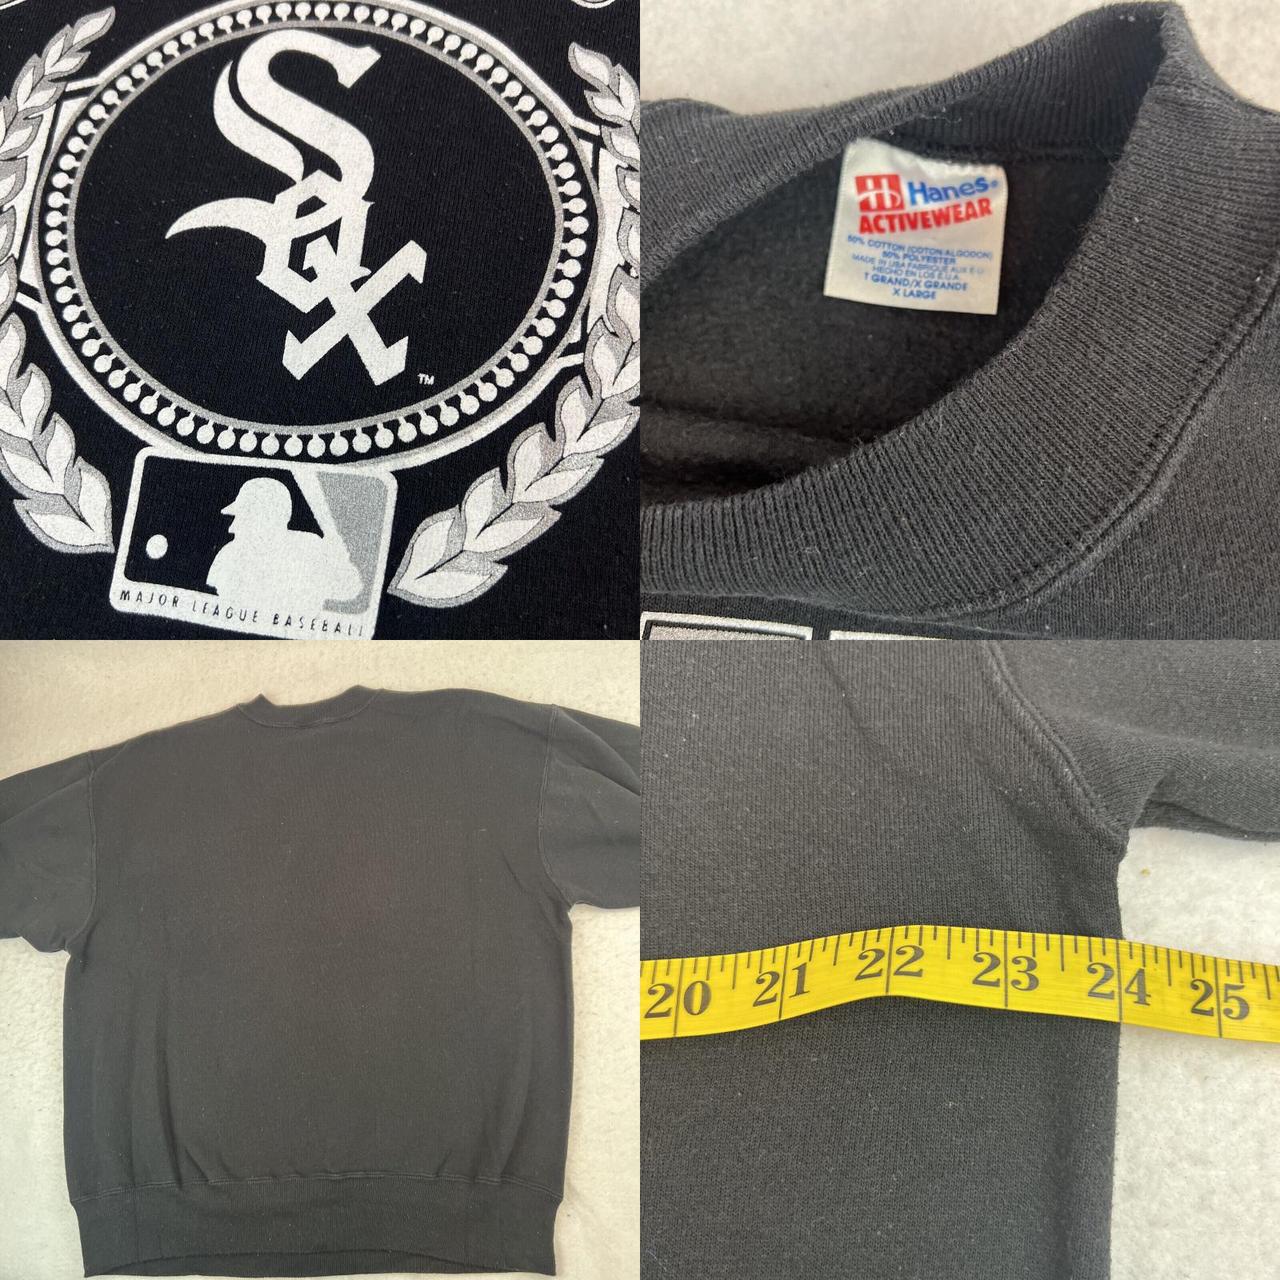 Vintage 1993 Chicago White Sox Sweatshirt by Hanes size L or XL 90s